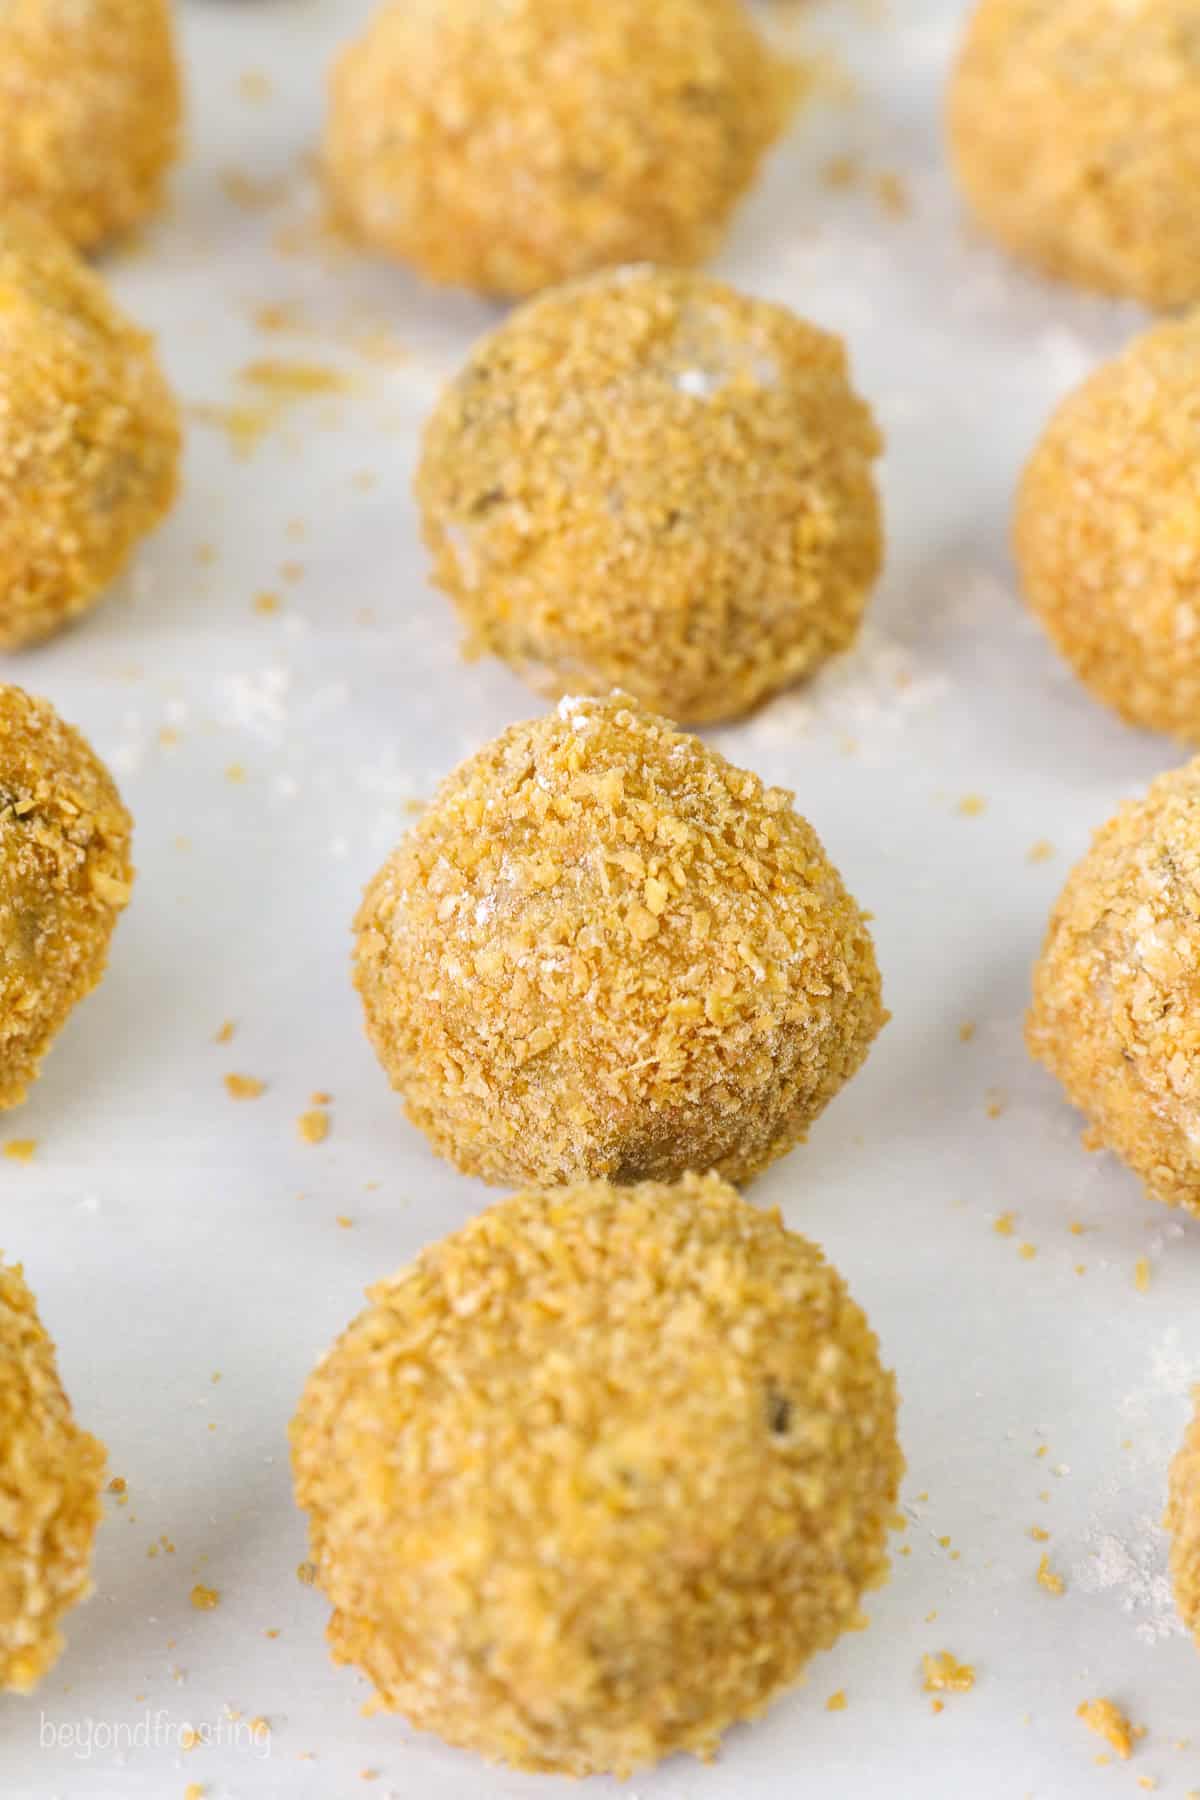 Rows of cookie dough balls coated with cornflake crumbs.